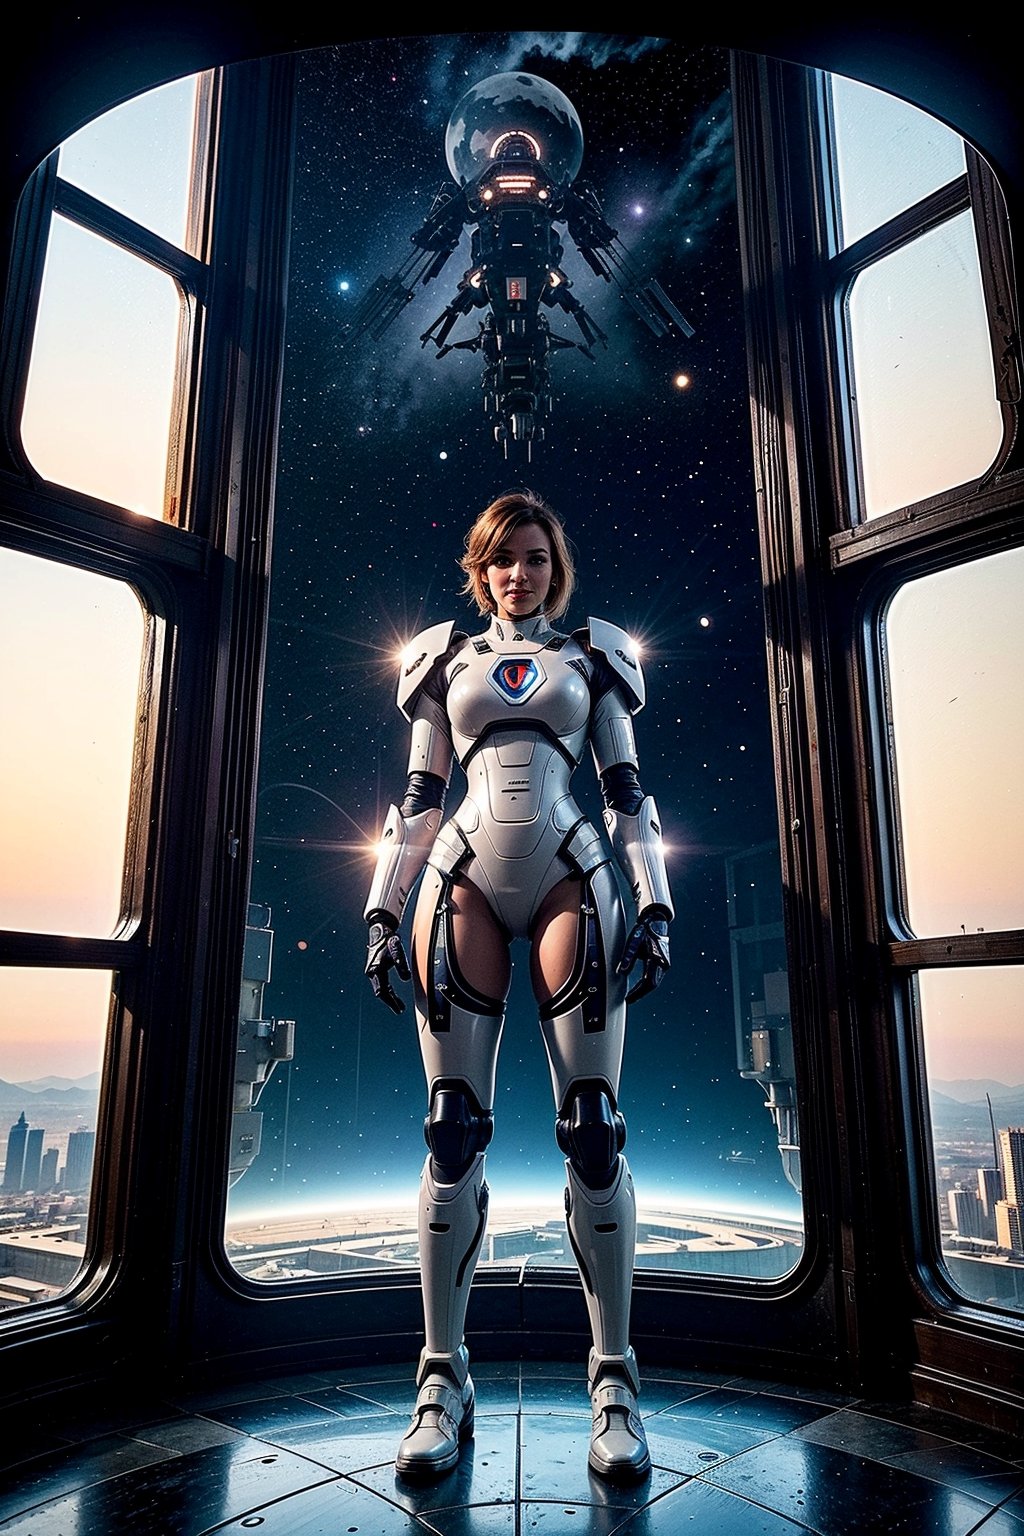 futuristic, sci-fi, outer space seen in window, 30 year old woman, brown wavy hair, detailed face, standing in spaceship next to panoramic window, seductive smile, wearing white mecha armour, photorealistic, wide angle, full body image